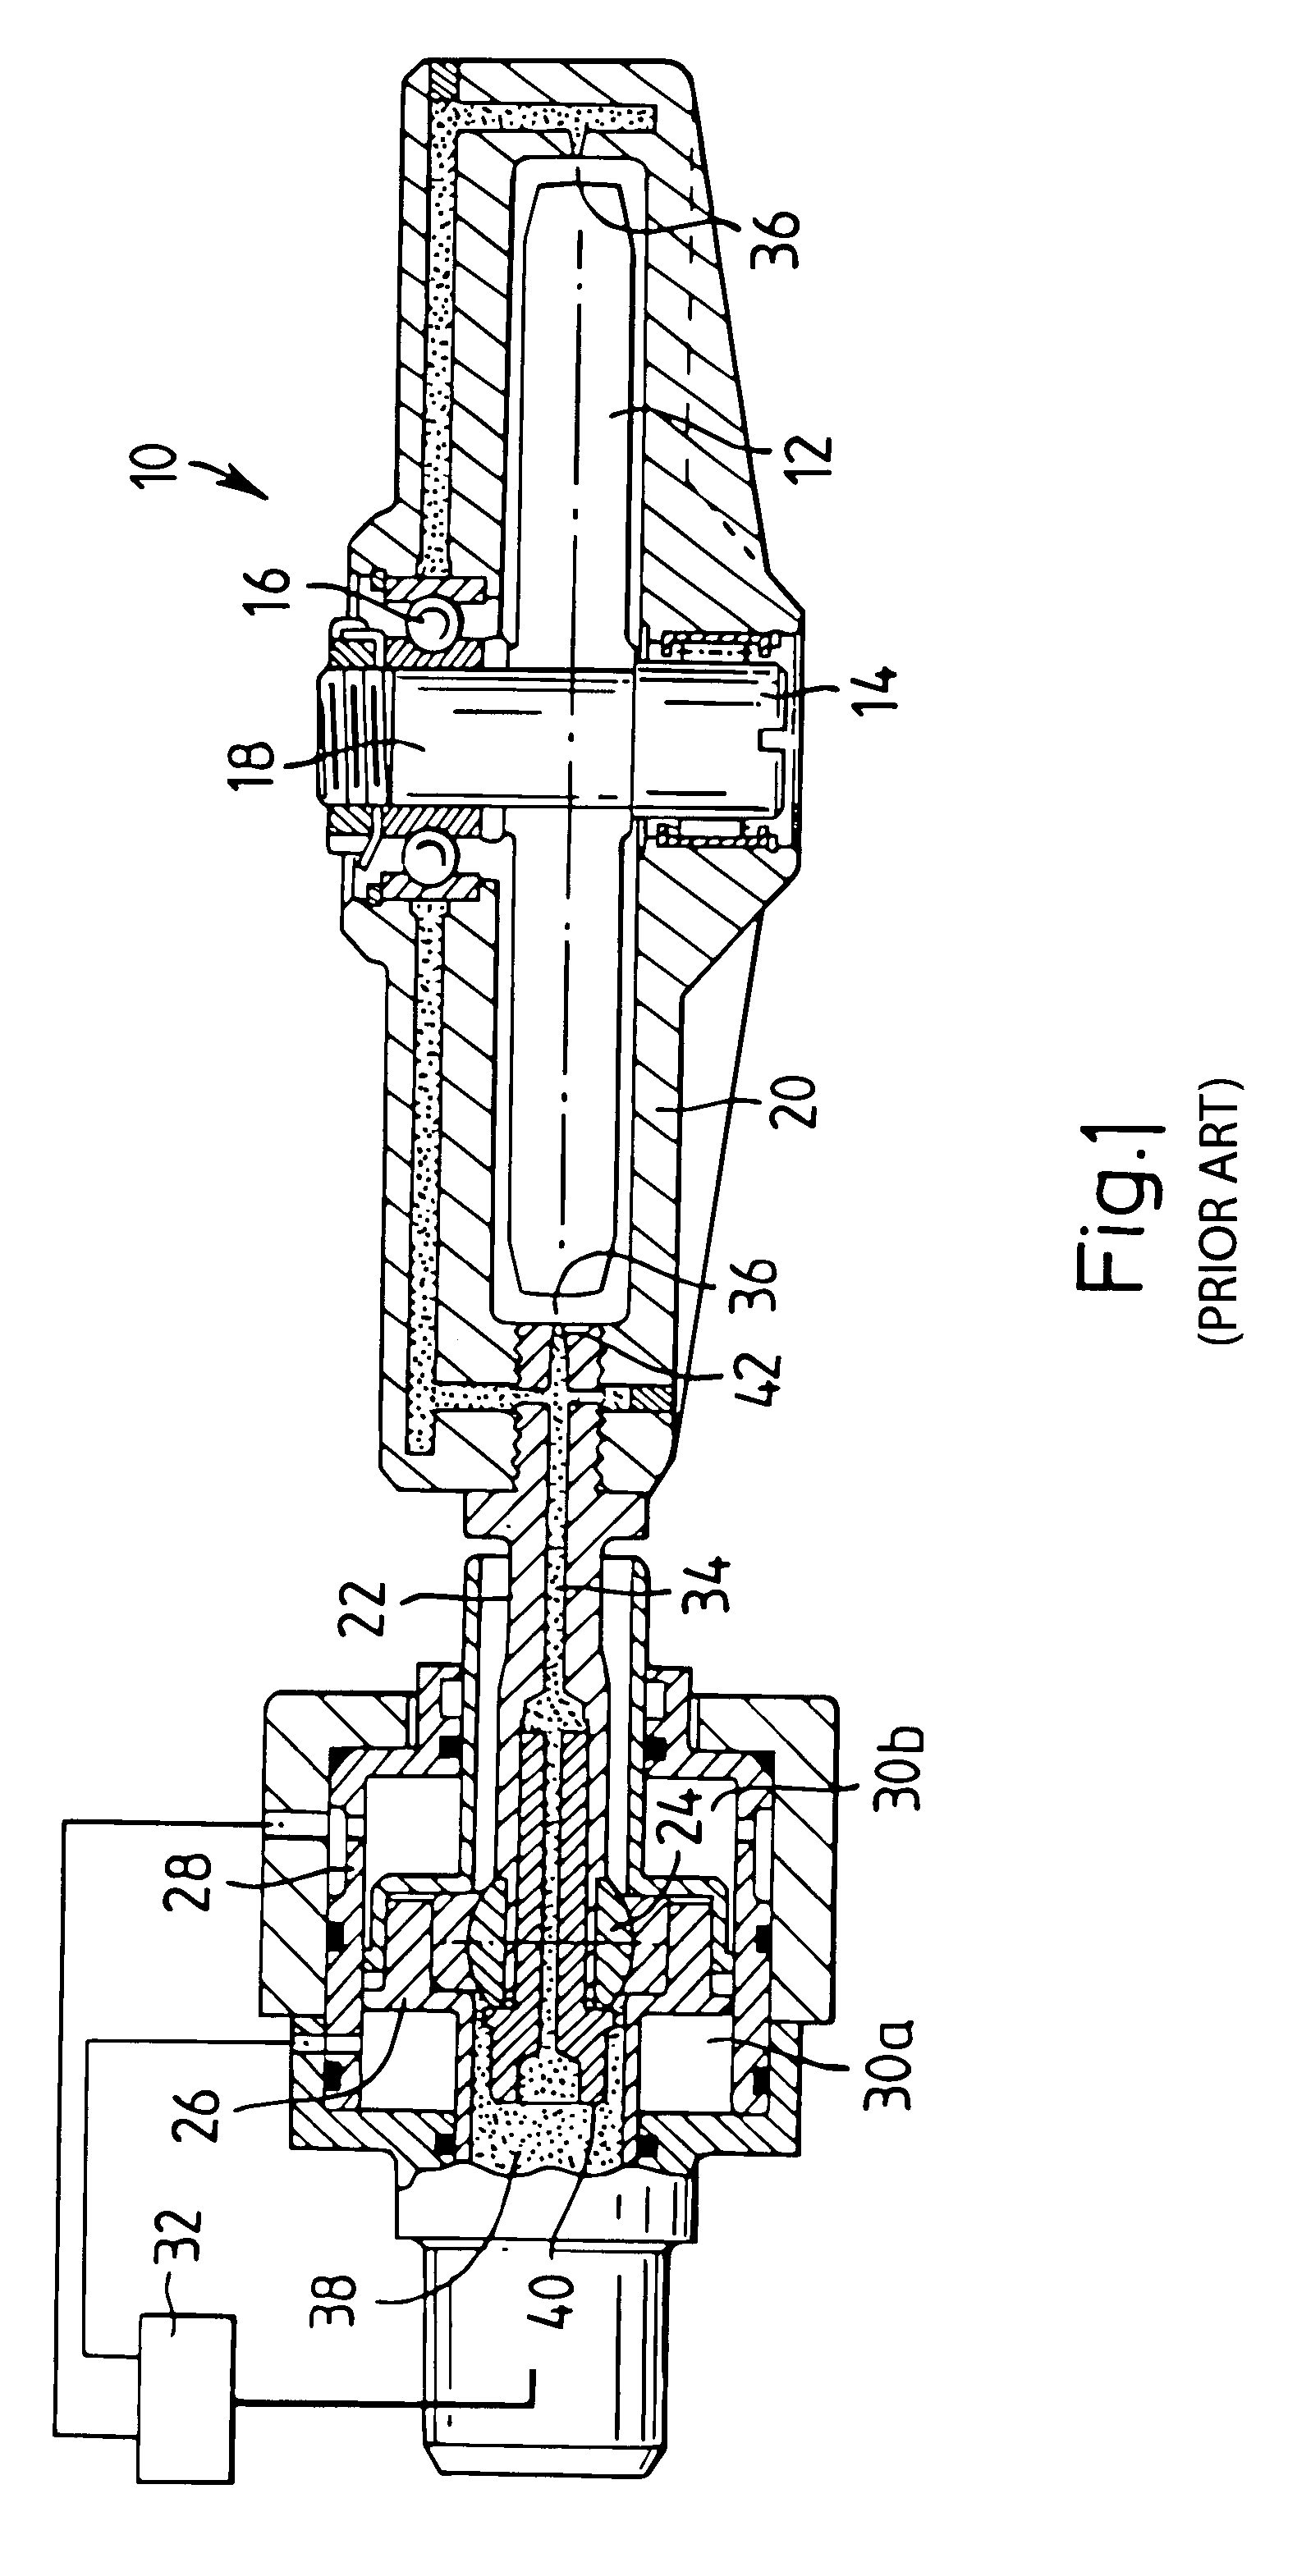 Cooling fluid supply to hydraulically actuated rollers in a continuously-variable-ratio transmission